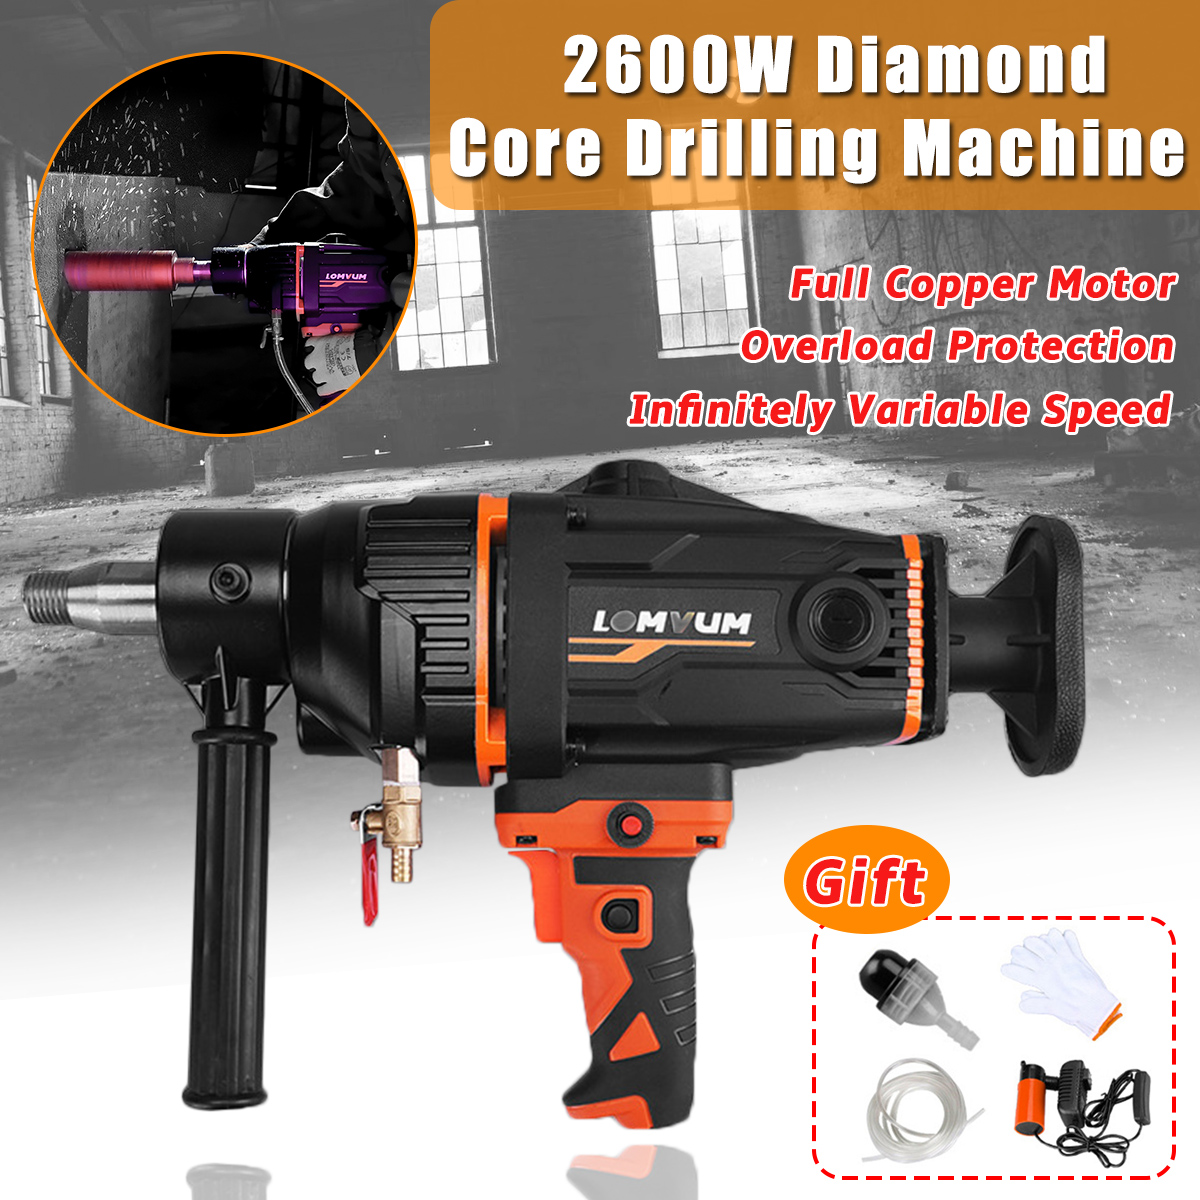 2600W-220V-1800-rpm-Diamond-Core-Hole-Puncher--Drilling-Machine-Infinitely-Variable-Speed-4-Styles-1598415-1